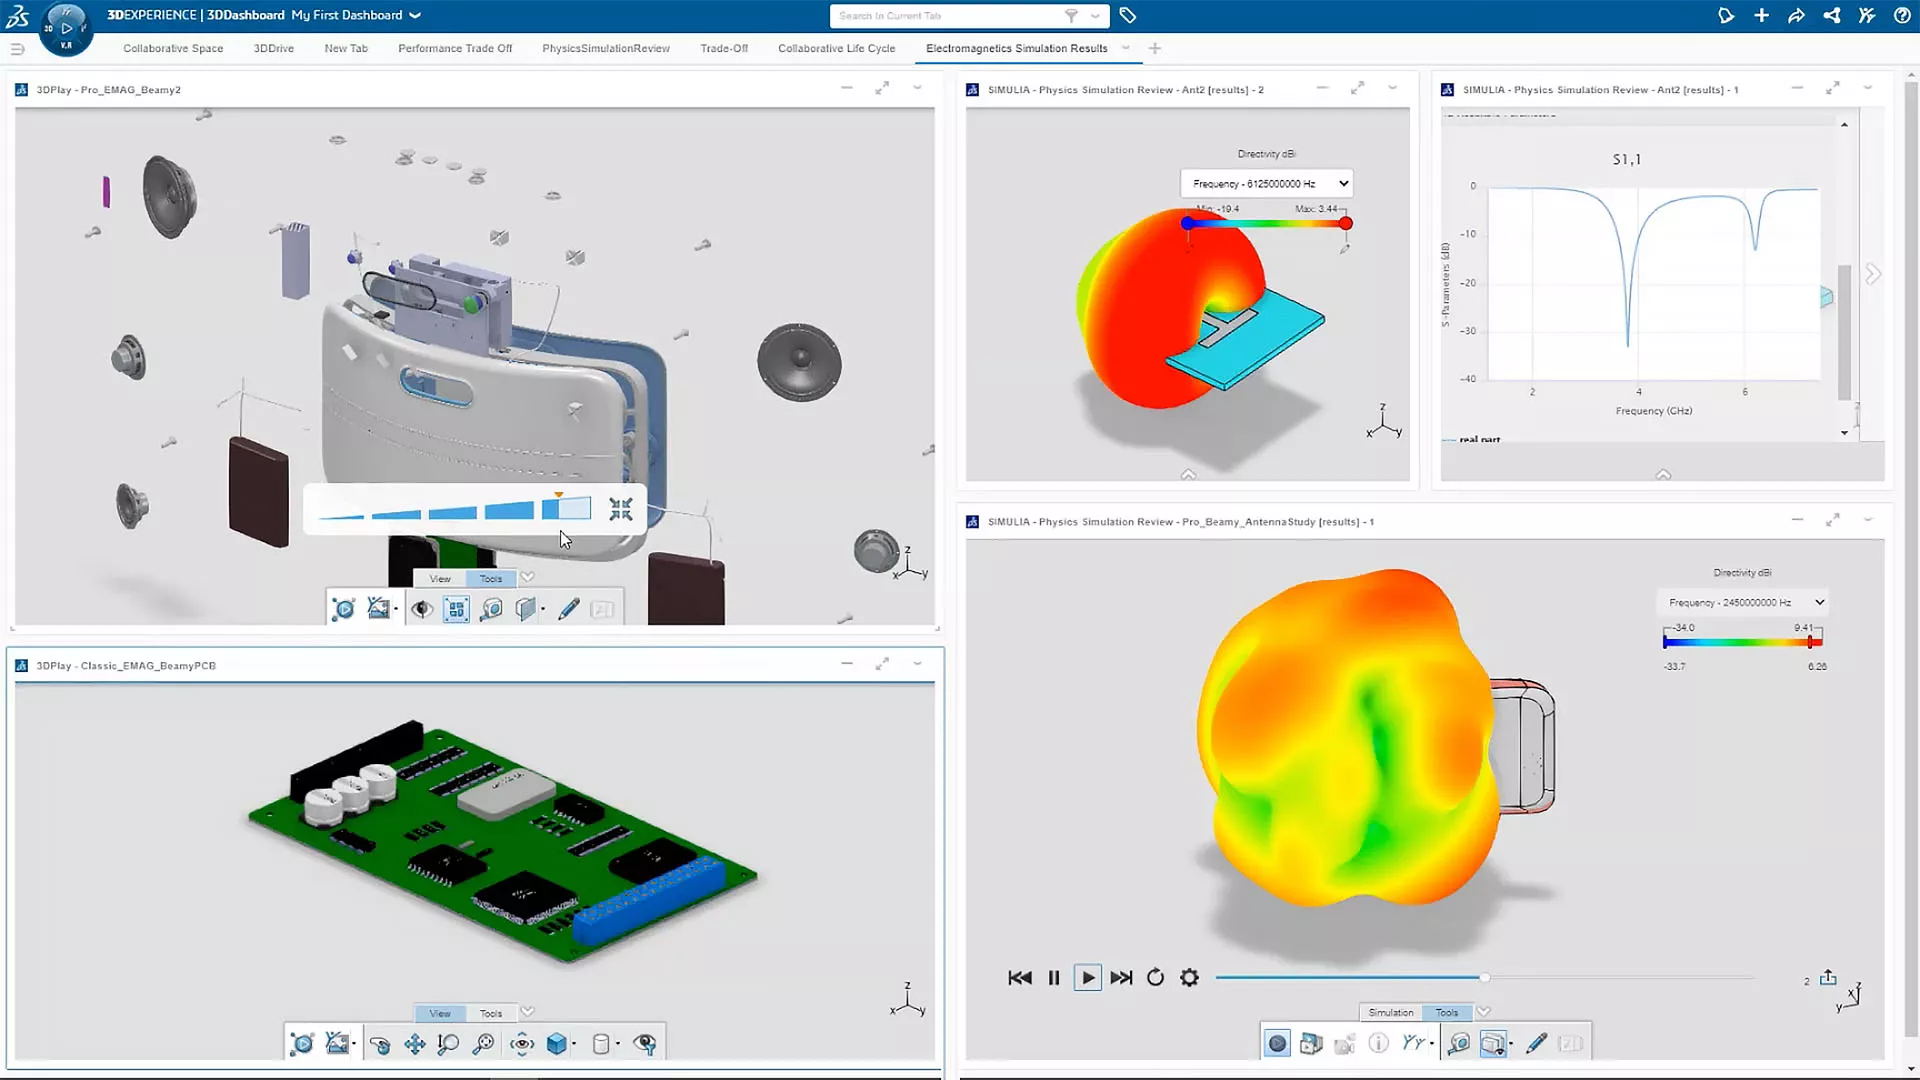 A fully-integrated, continuous CAD-CAE-CAM-PLM platform makes it easy for projects to move from team to team and department to department.